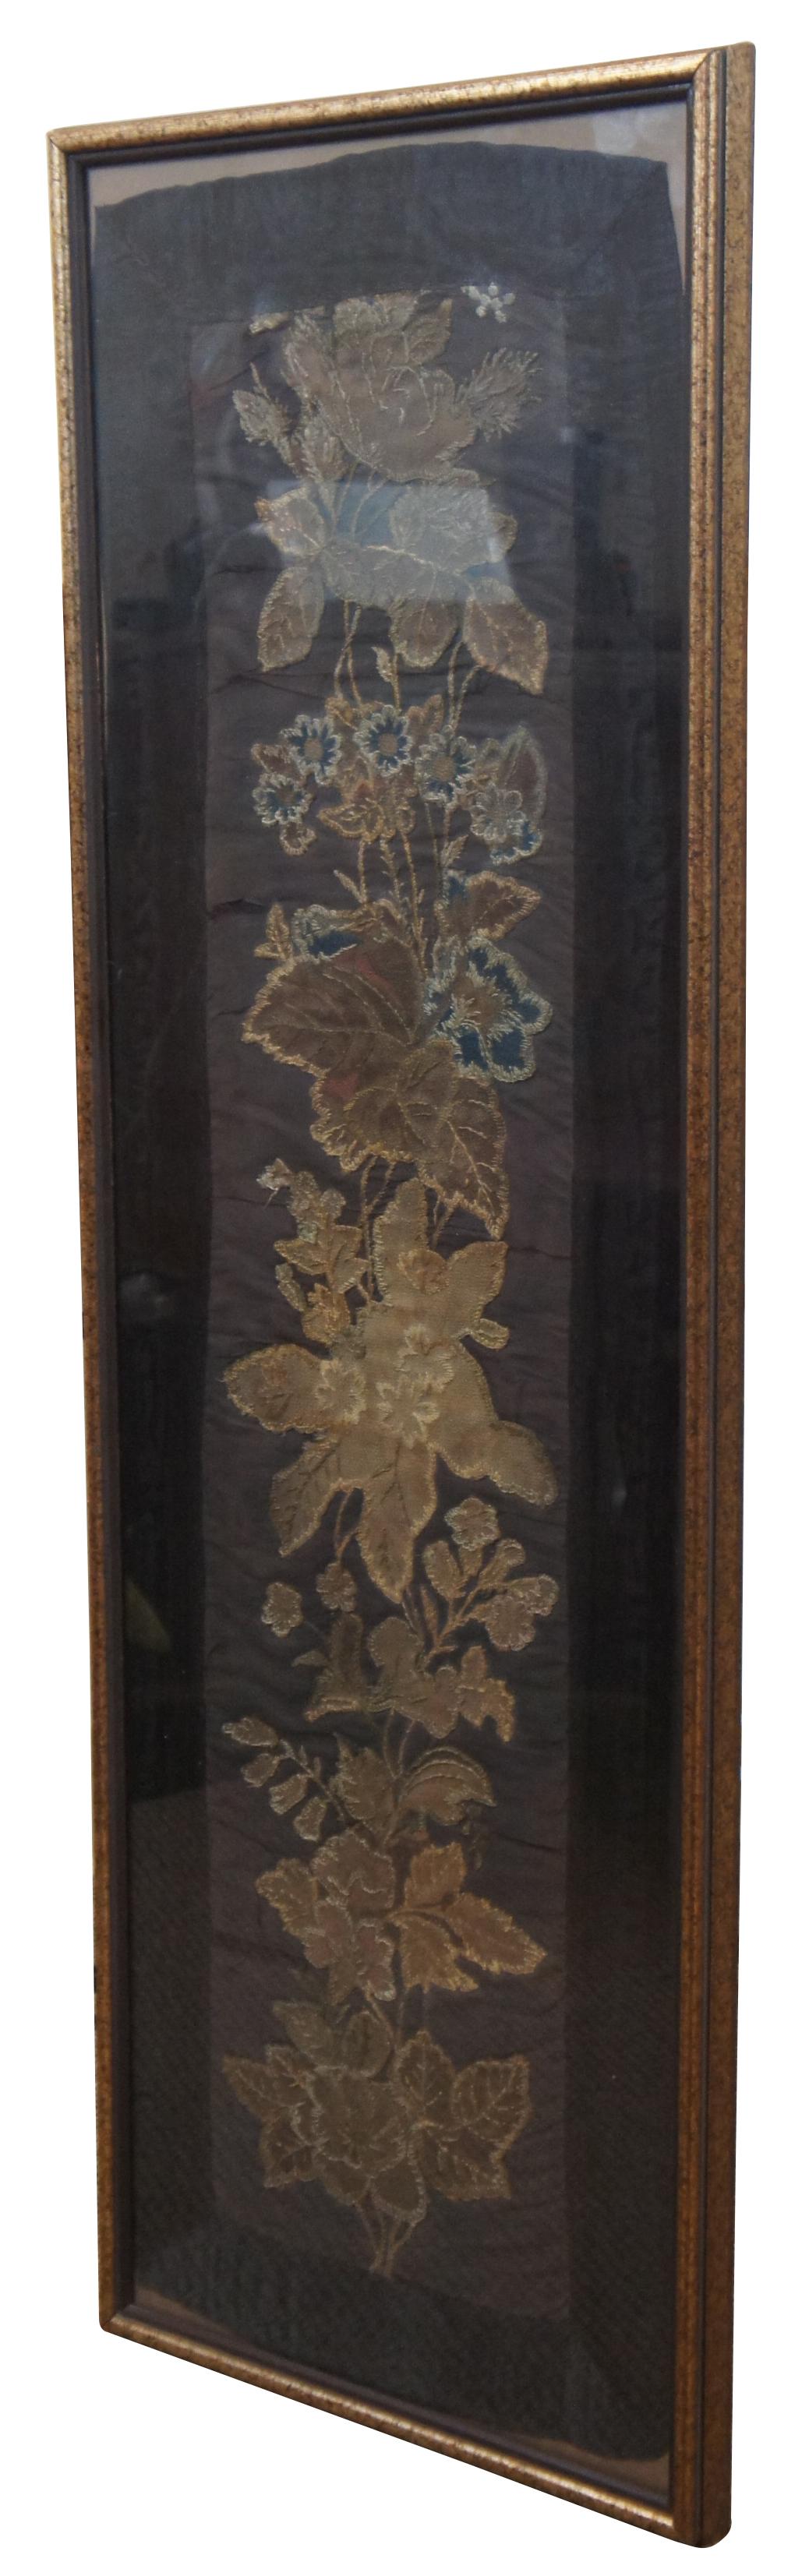 Large antique framed Chinese black silk folk art textile / tapestry panel or table runner embroidered with brown, gold and blue flowers / leaves.

13.5” x 1” x 41.25” / Sans Frame - 12” x 39.5” (Width x Depth x Height).